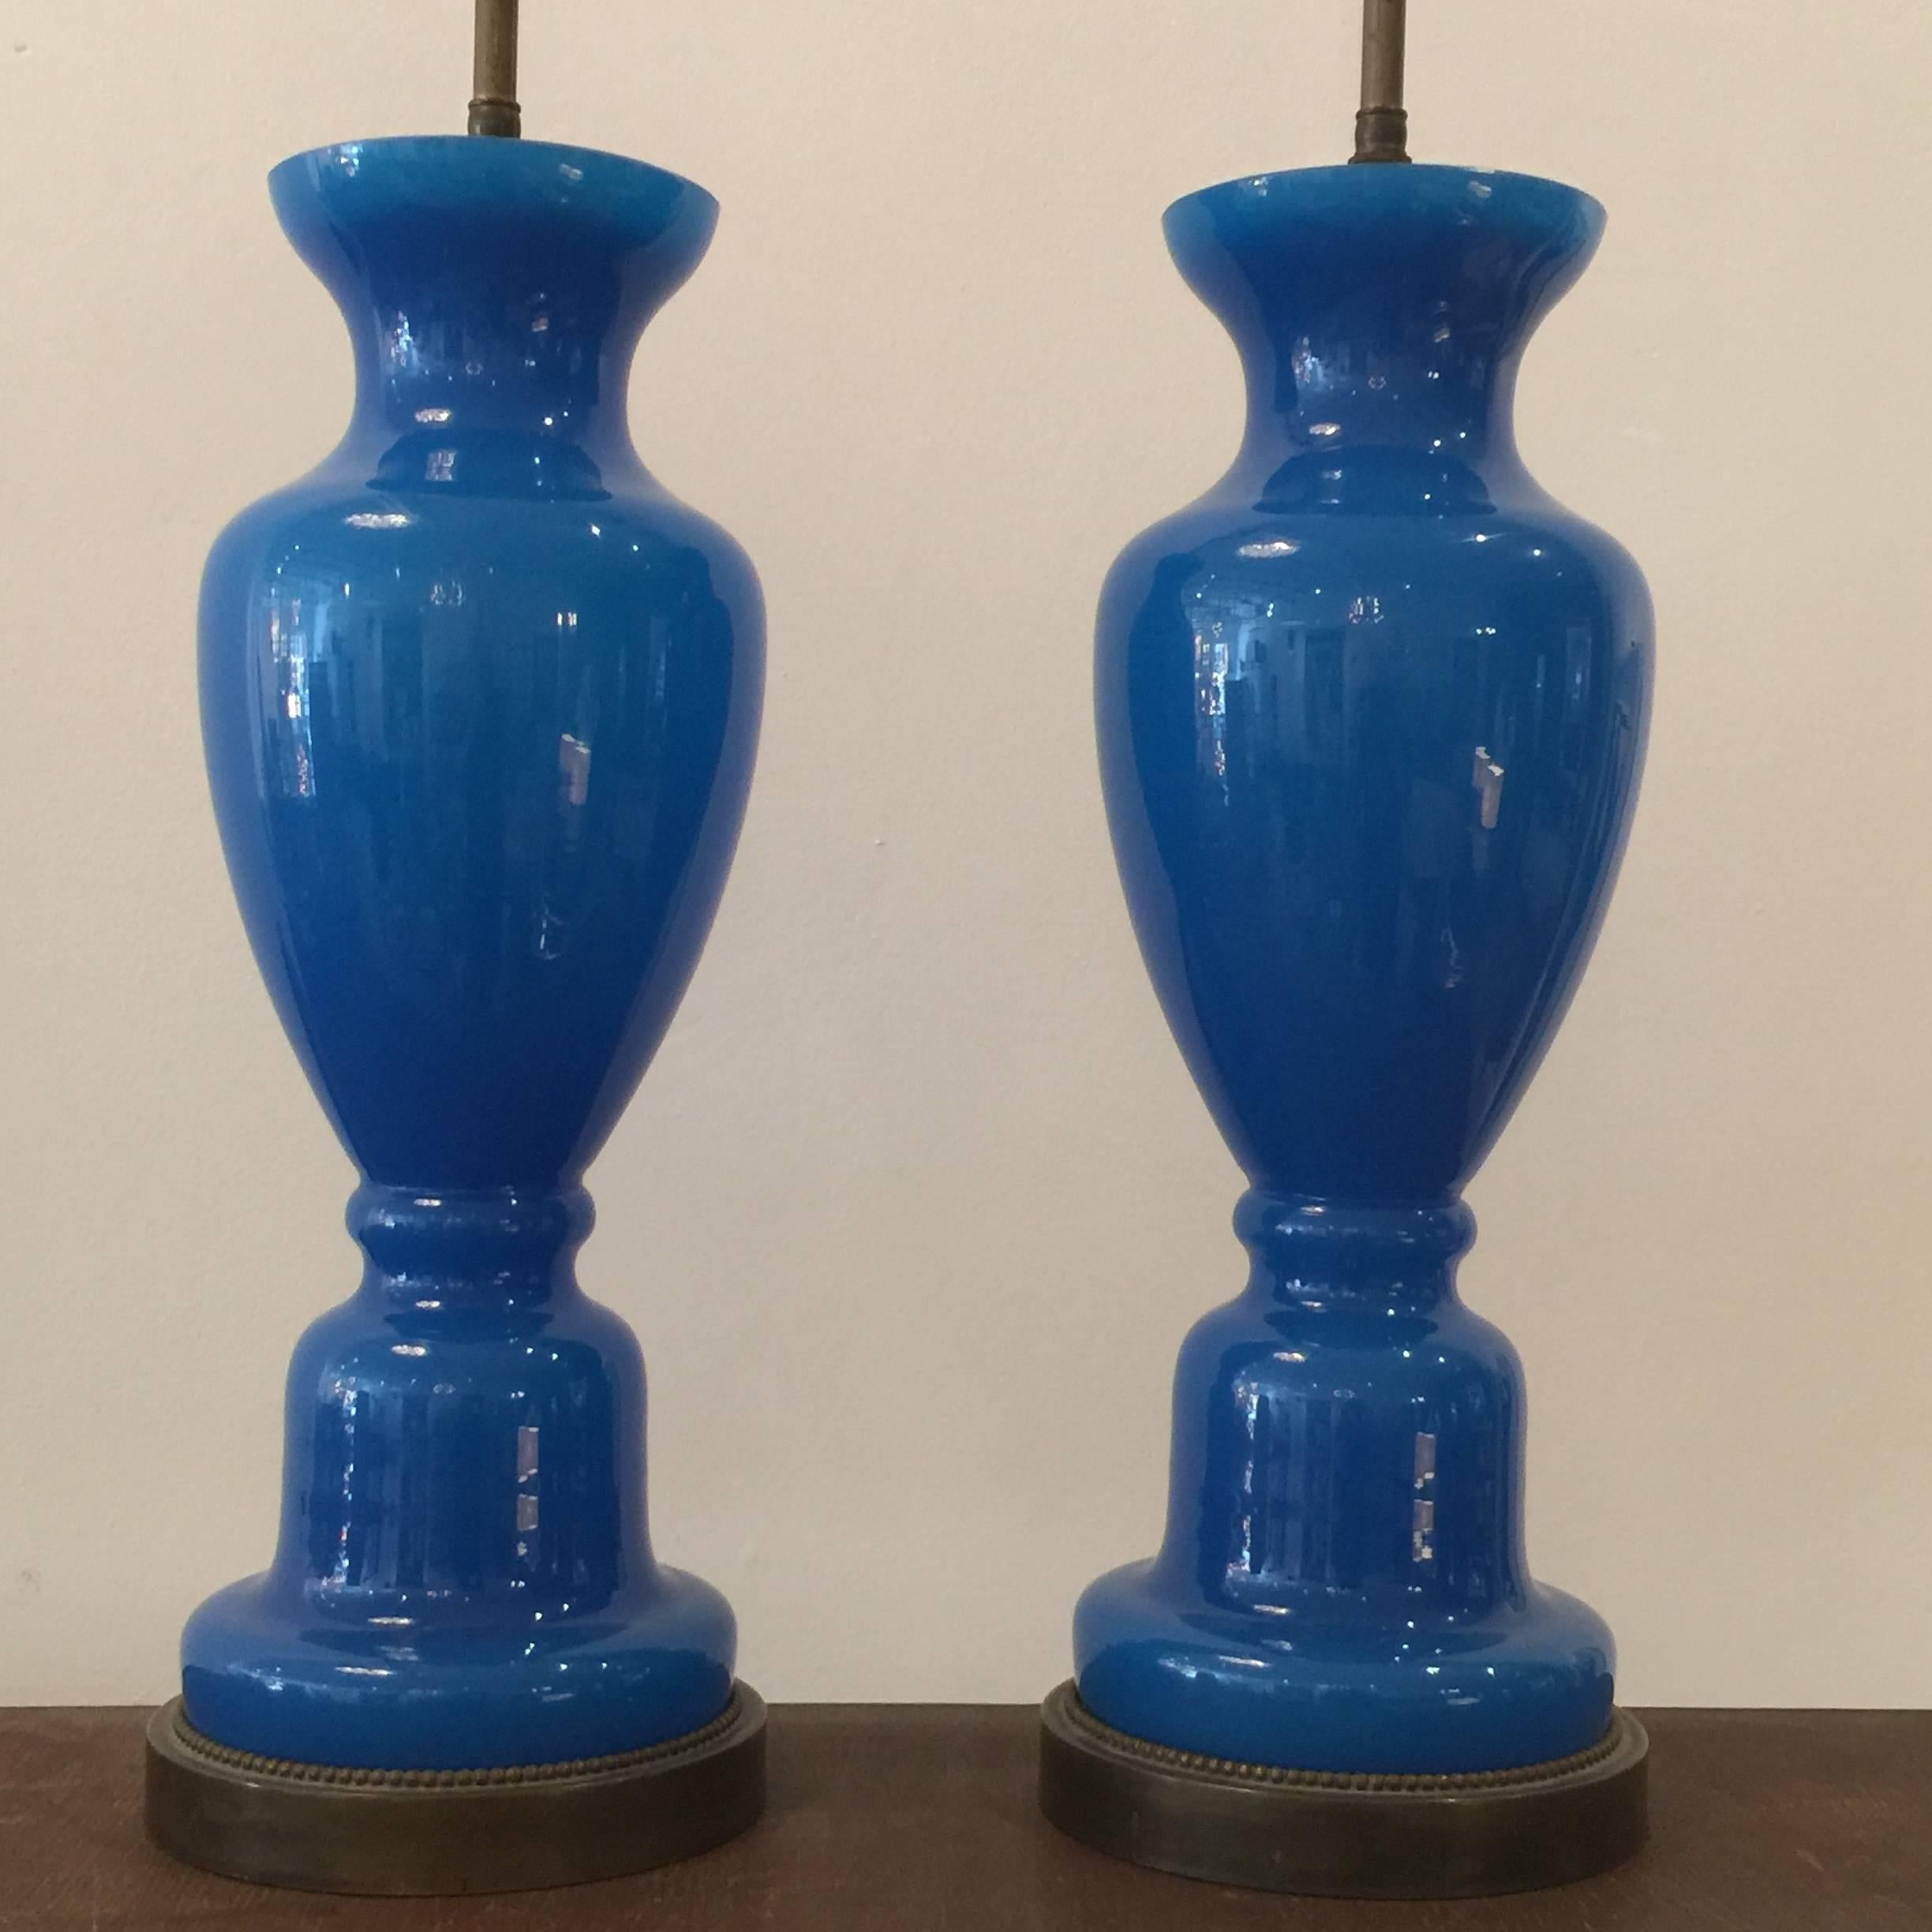 In a Classic urn design, these stunning blue French opaline lamps are vintage and all original. Dimensions of glass only = 19 inch tall.